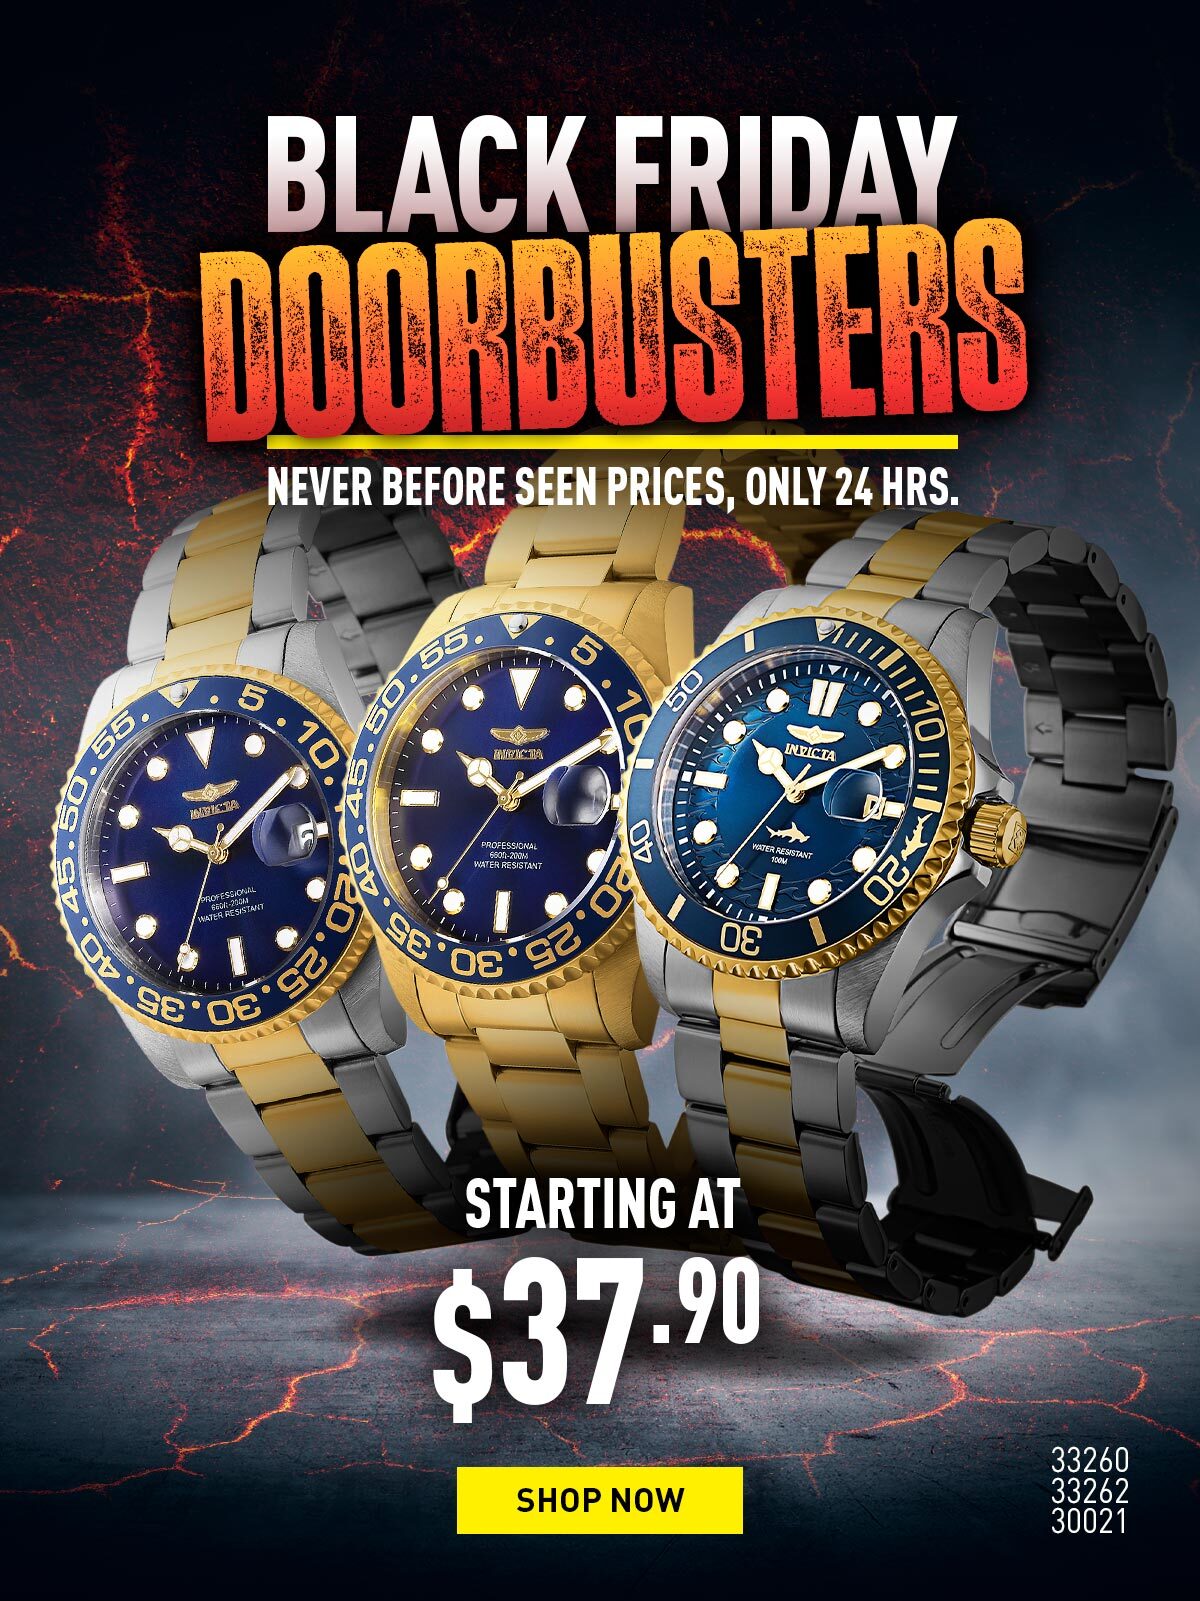 Black Friday DoorBusters, Never Before Seen Prices, Only 24 Hrs.